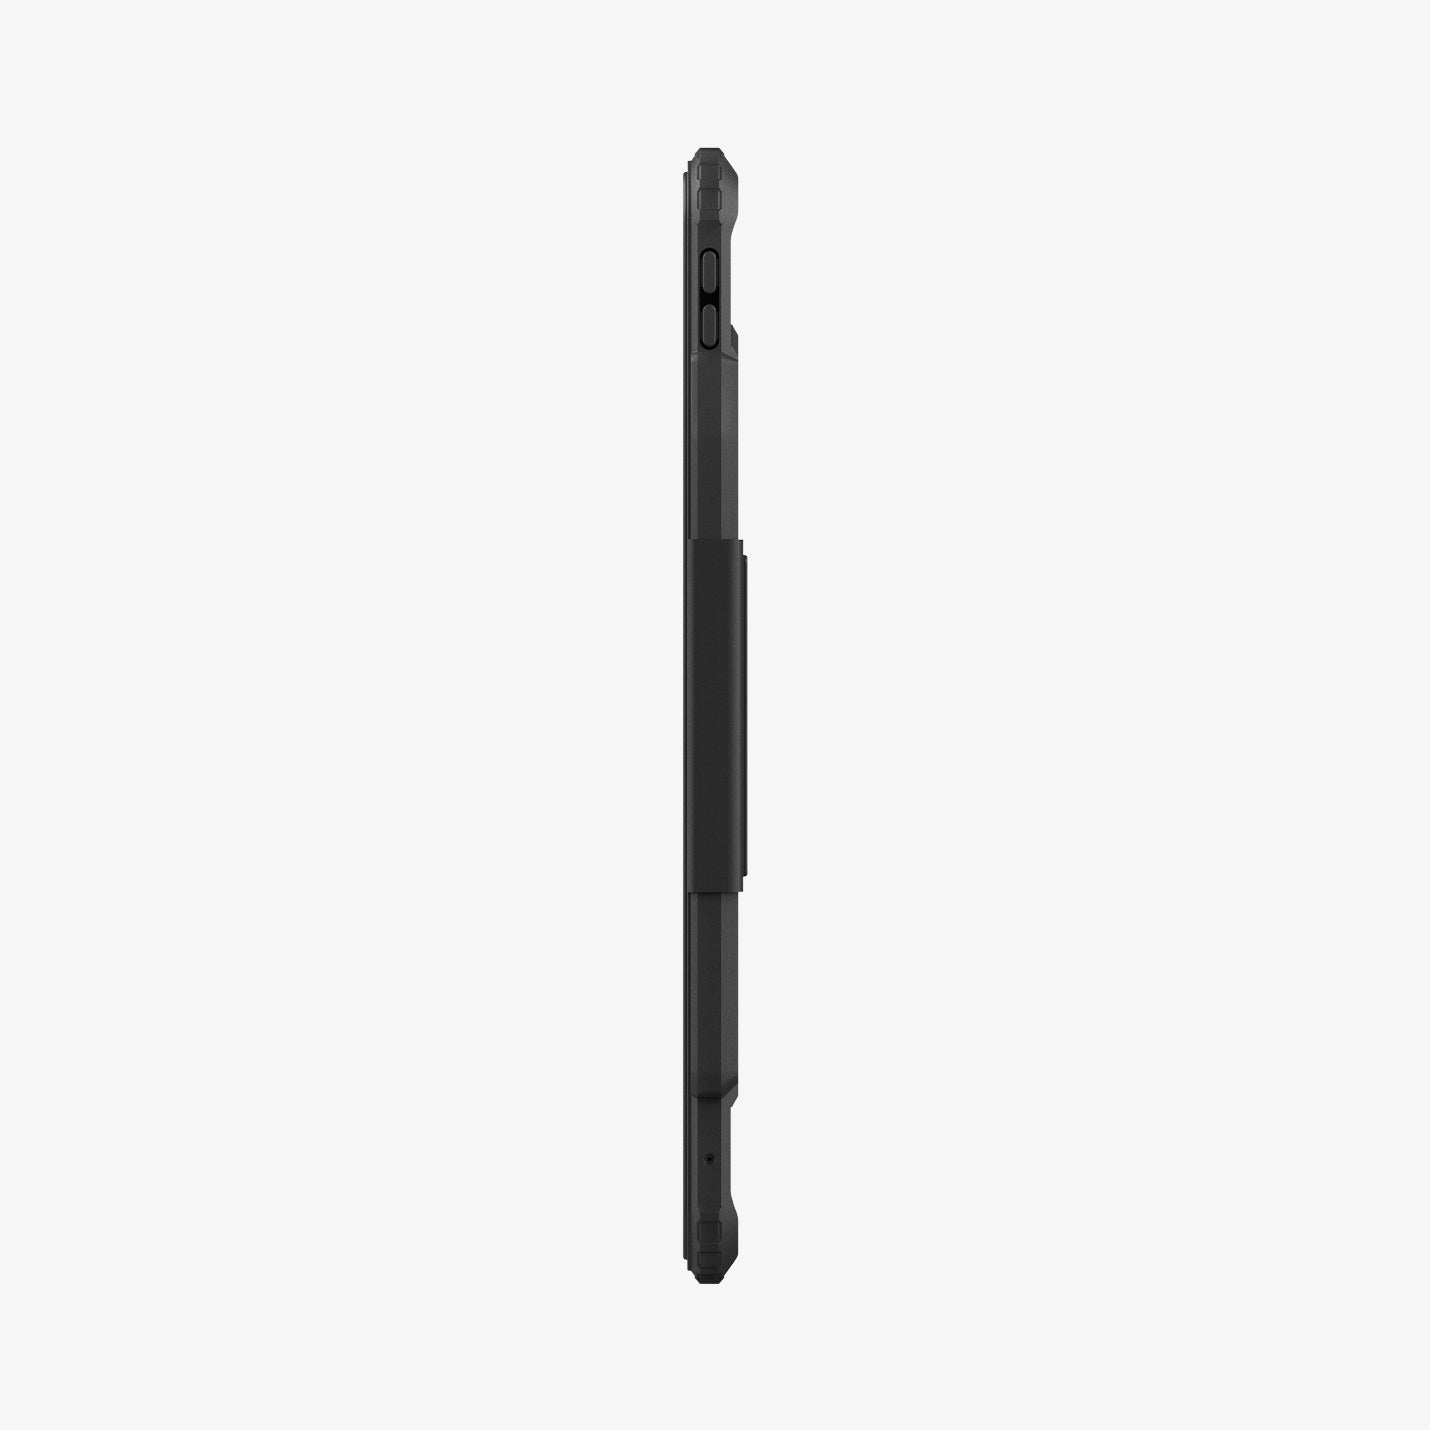 ACS07016 - iPad Pro 11-inch Case Ultra Hybrid Pro in Black showing the side